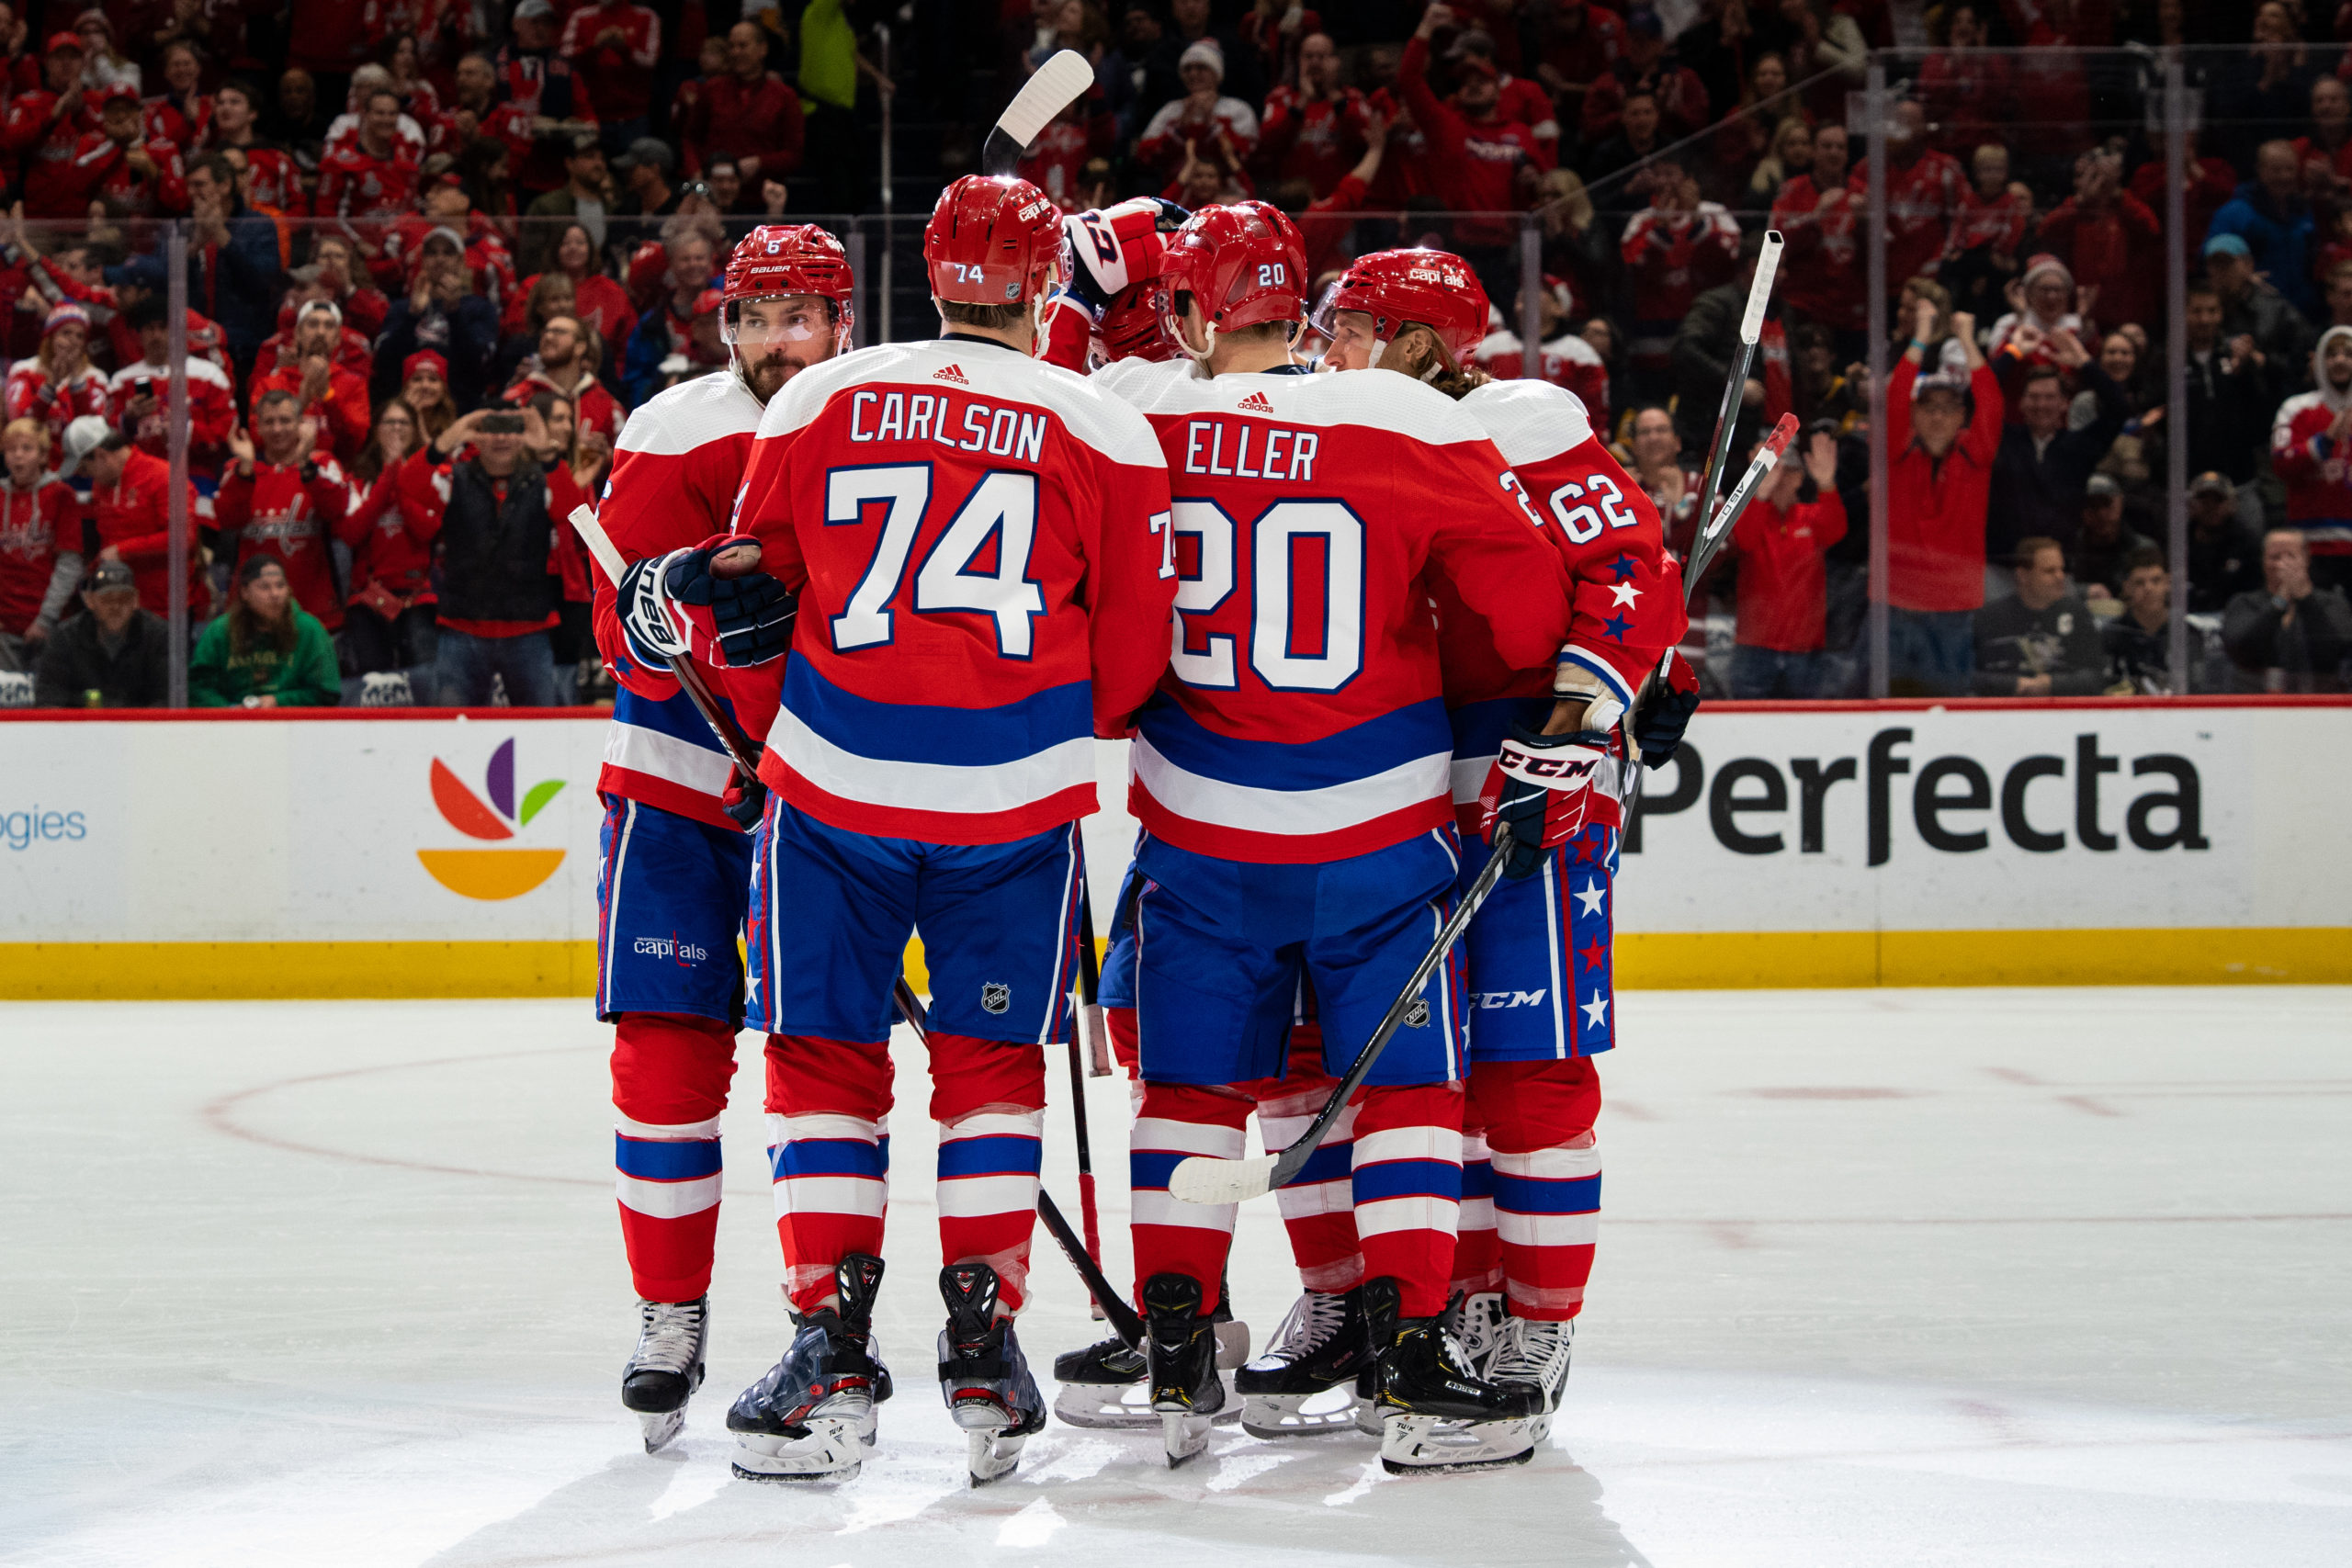 The Capitals are looking to start the year on the right foot.